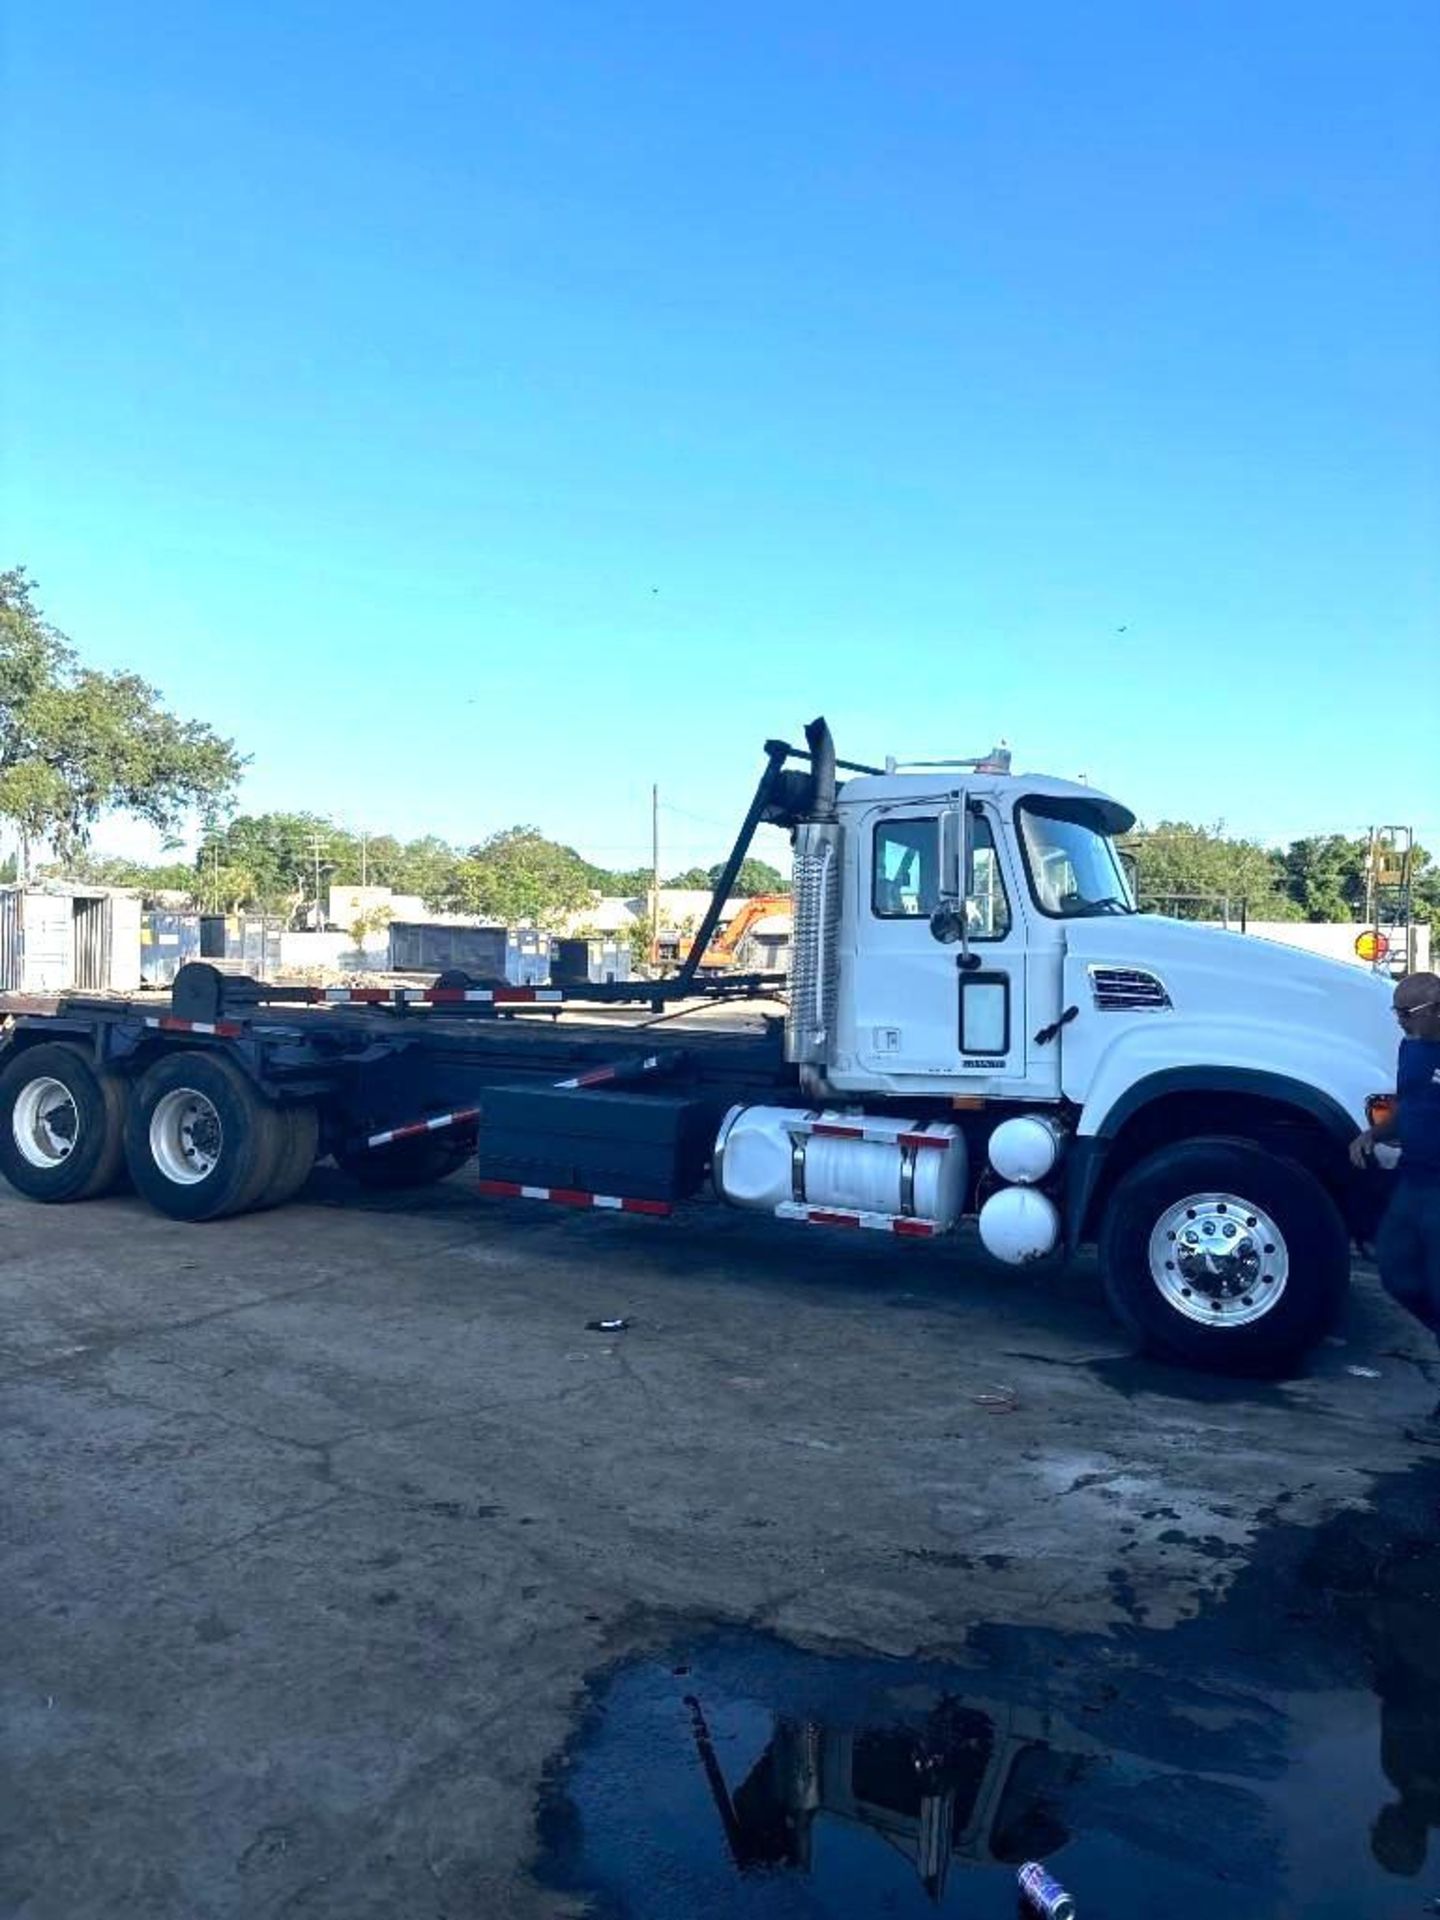 2006 MACK CV713 GRANITE ROLL OFF TRUCK, DIESEL, GVWR RECENTLY REPLACED TRANSMISSION / AC SYSTEM &... - Image 2 of 14